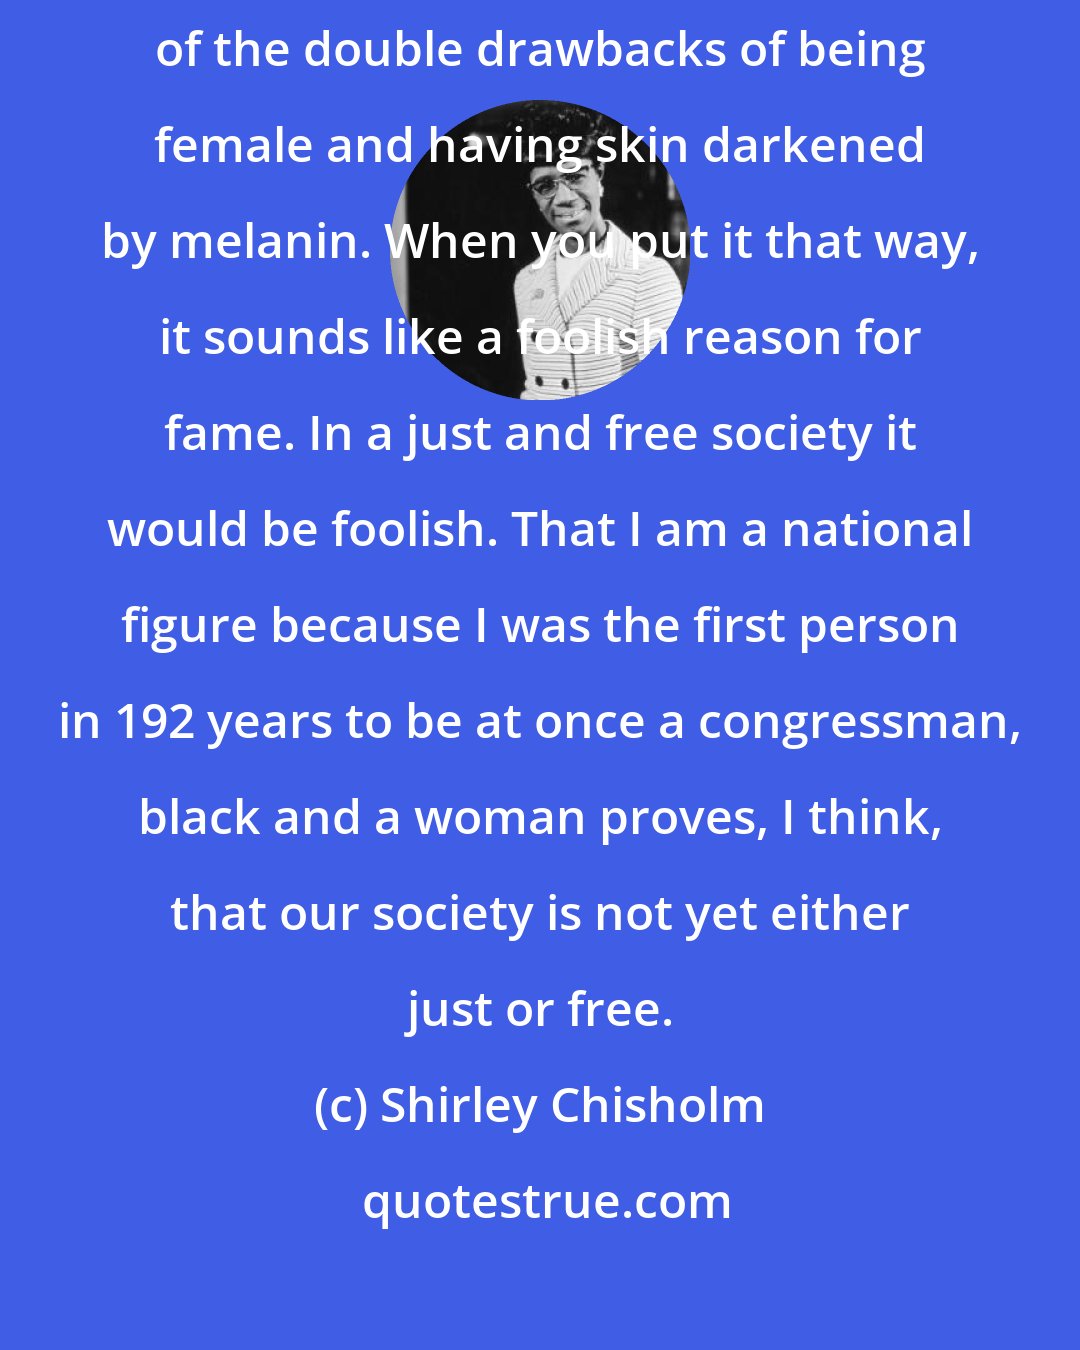 Shirley Chisholm: I was the first American citizen to be elected to Congress in spite of the double drawbacks of being female and having skin darkened by melanin. When you put it that way, it sounds like a foolish reason for fame. In a just and free society it would be foolish. That I am a national figure because I was the first person in 192 years to be at once a congressman, black and a woman proves, I think, that our society is not yet either just or free.